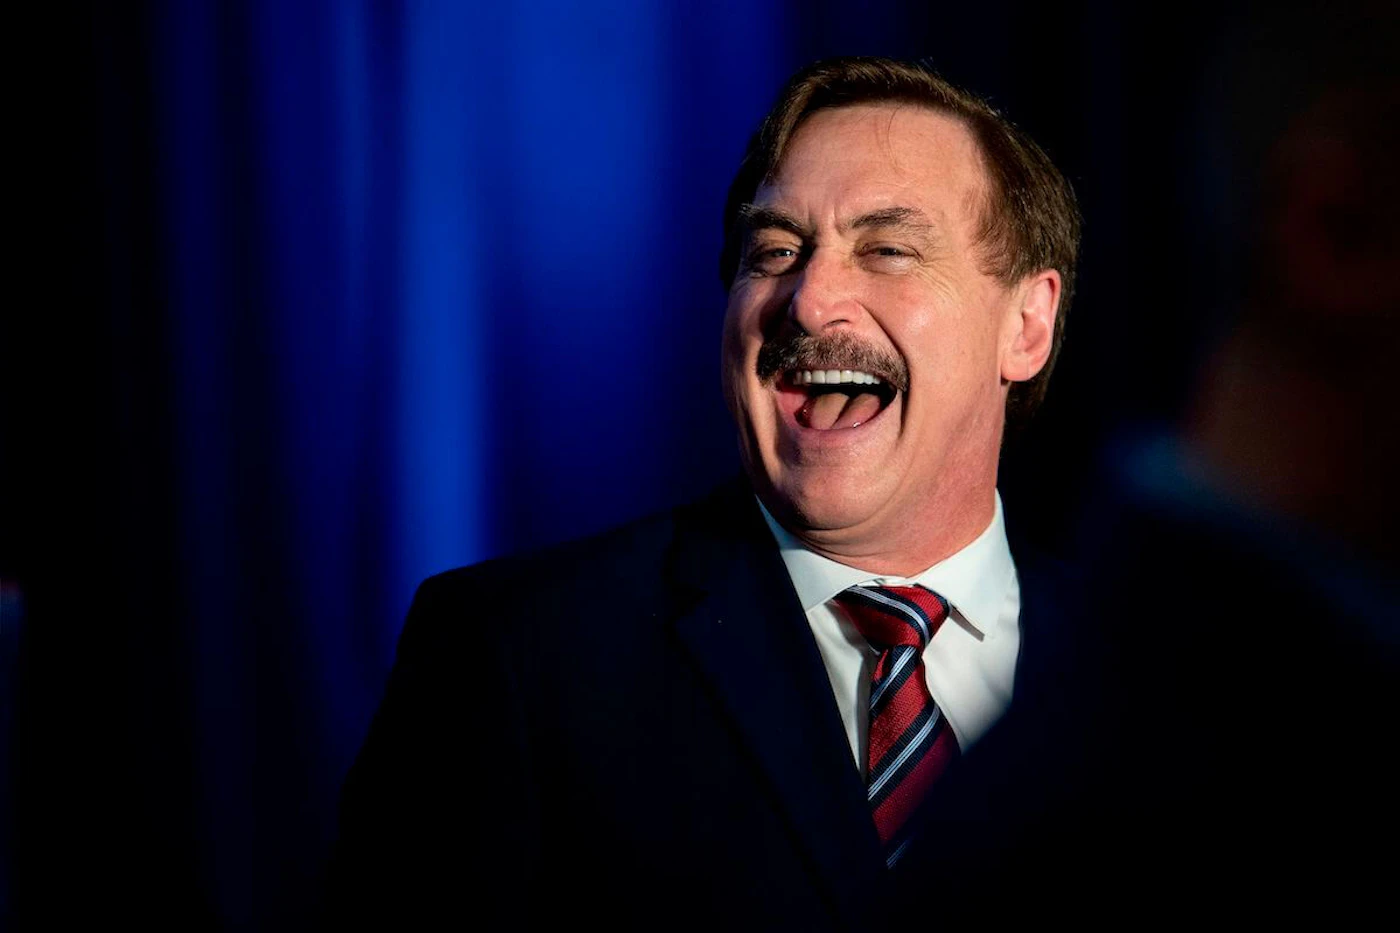 My Pillow CEO Michael Lindell laughs during a "Keep Iowa Great" press conference in Des Moines, IA, on February 3, 2020. (Photo by JIM WATSON/AFP via Getty Images)